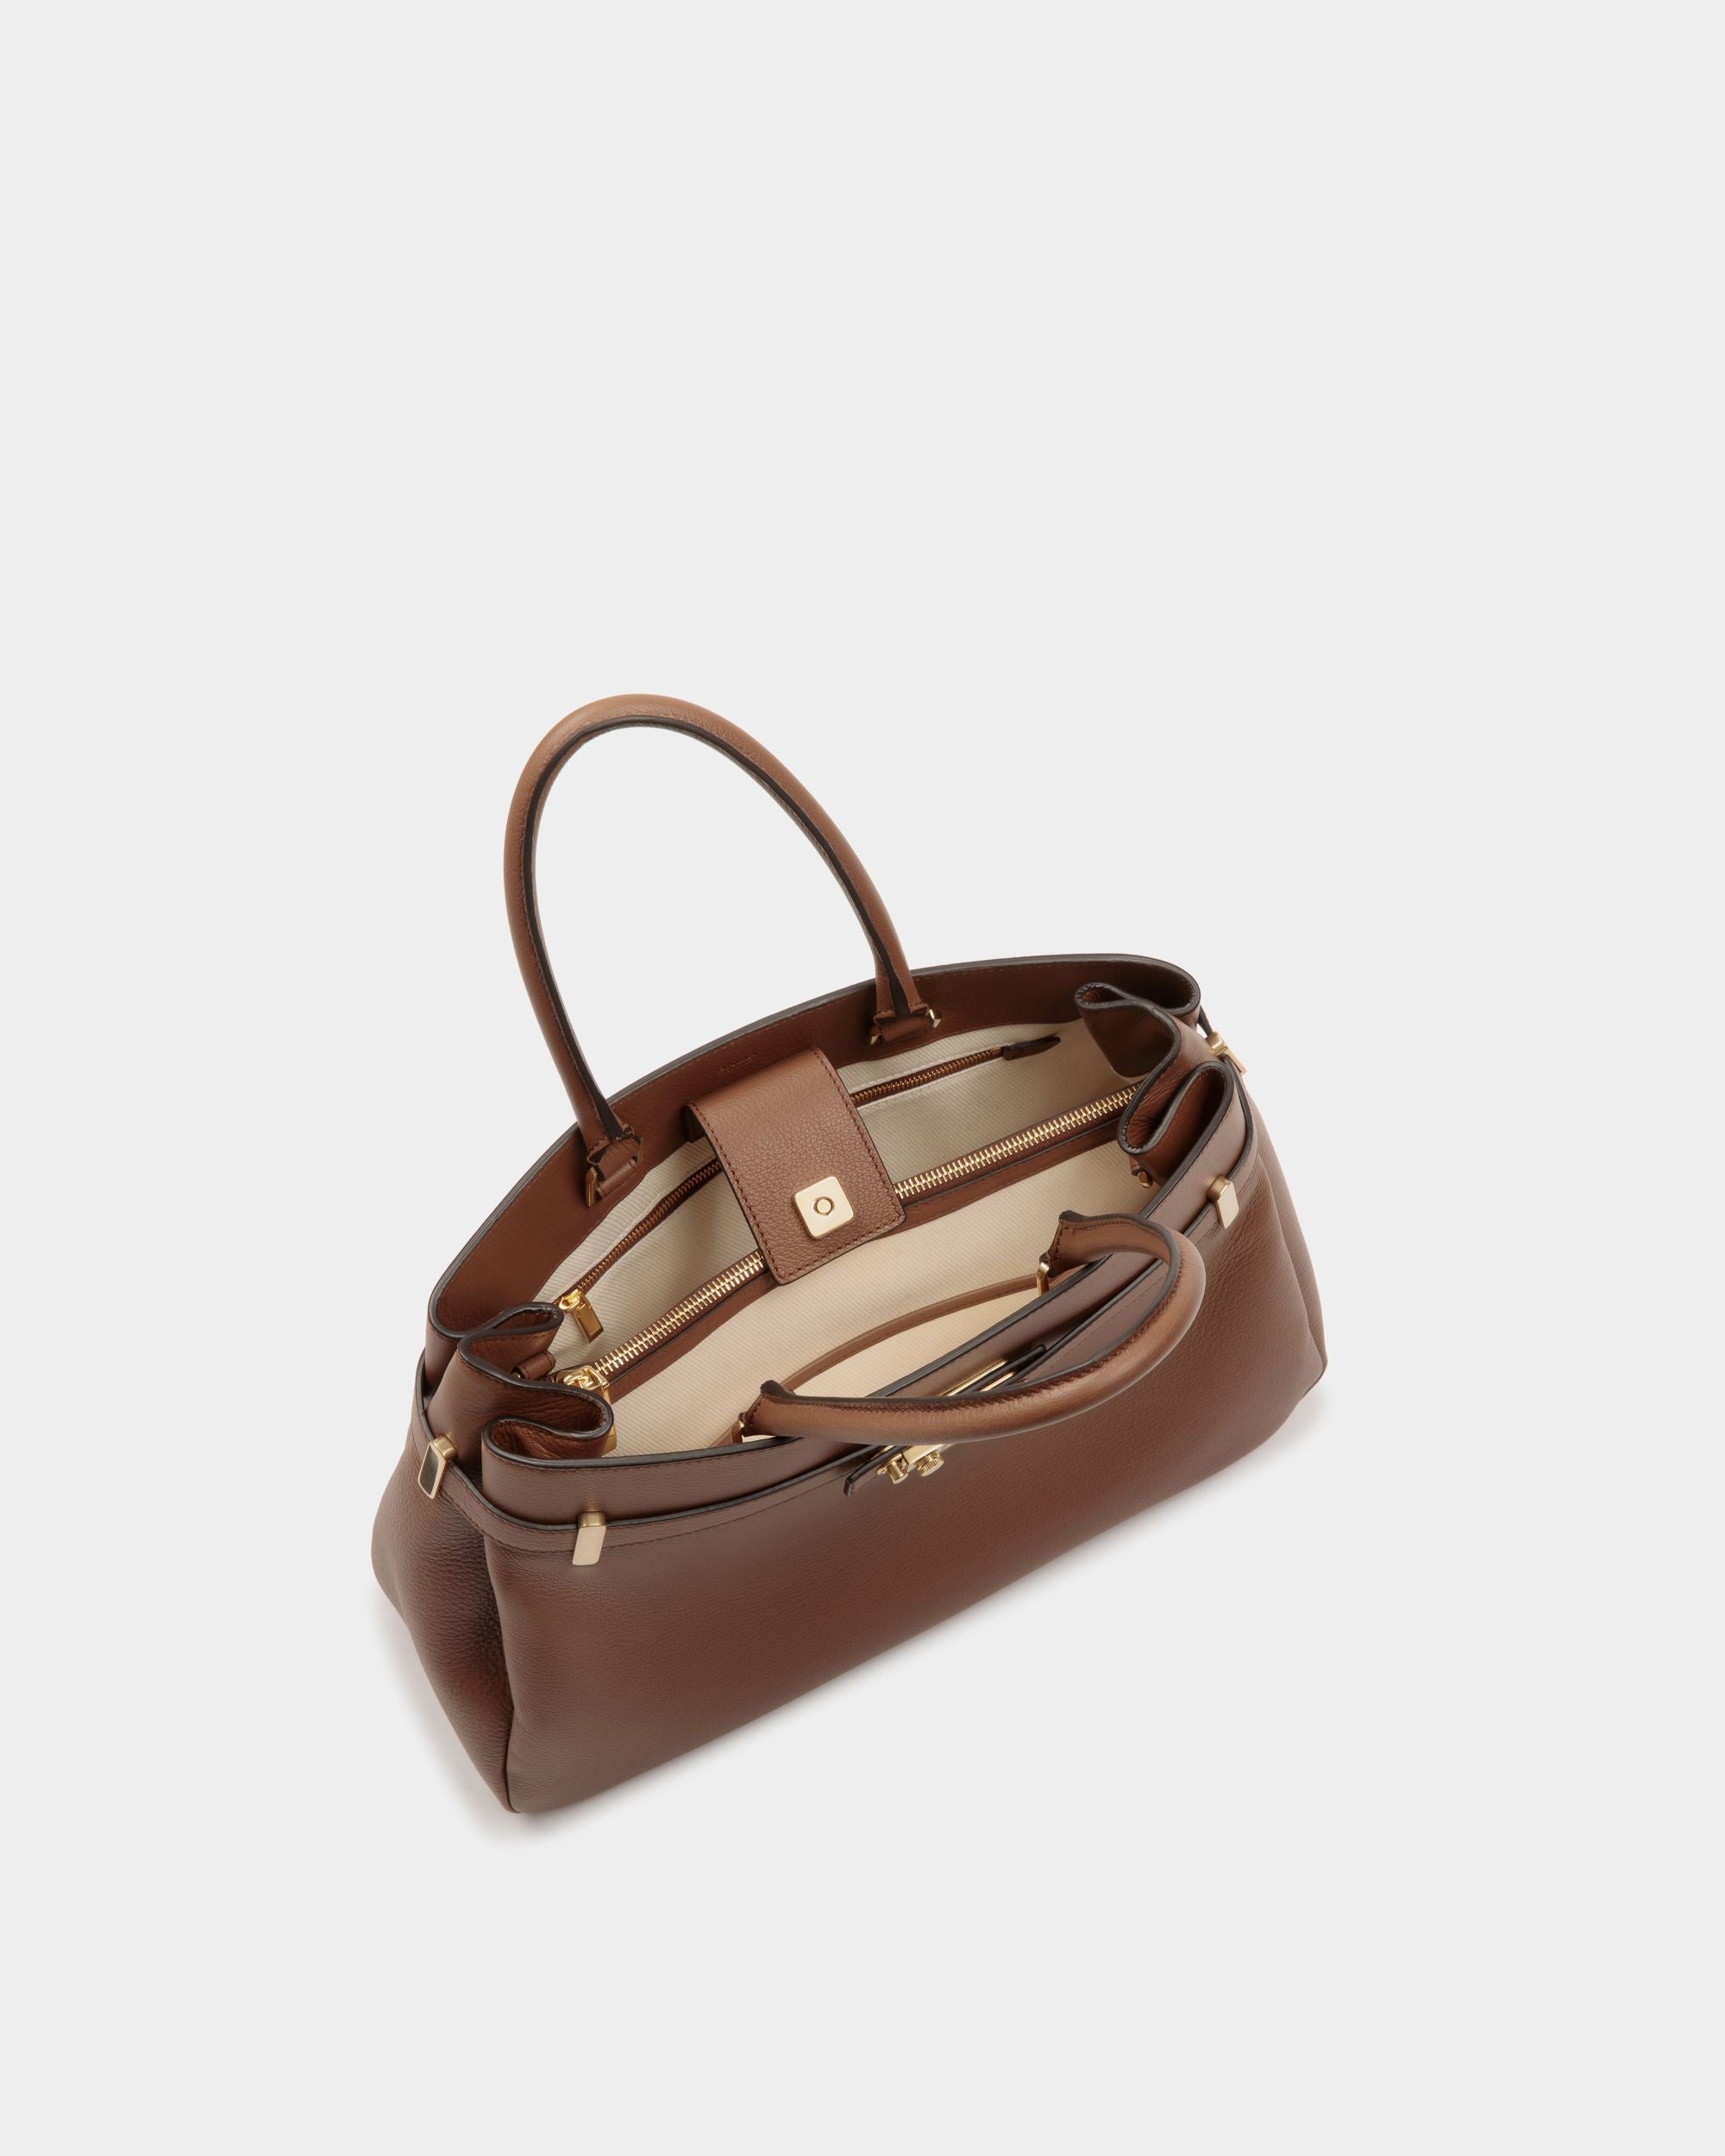 Carriage | Women's Tote Bag in Brown Leather | Bally | Still Life Open / Inside